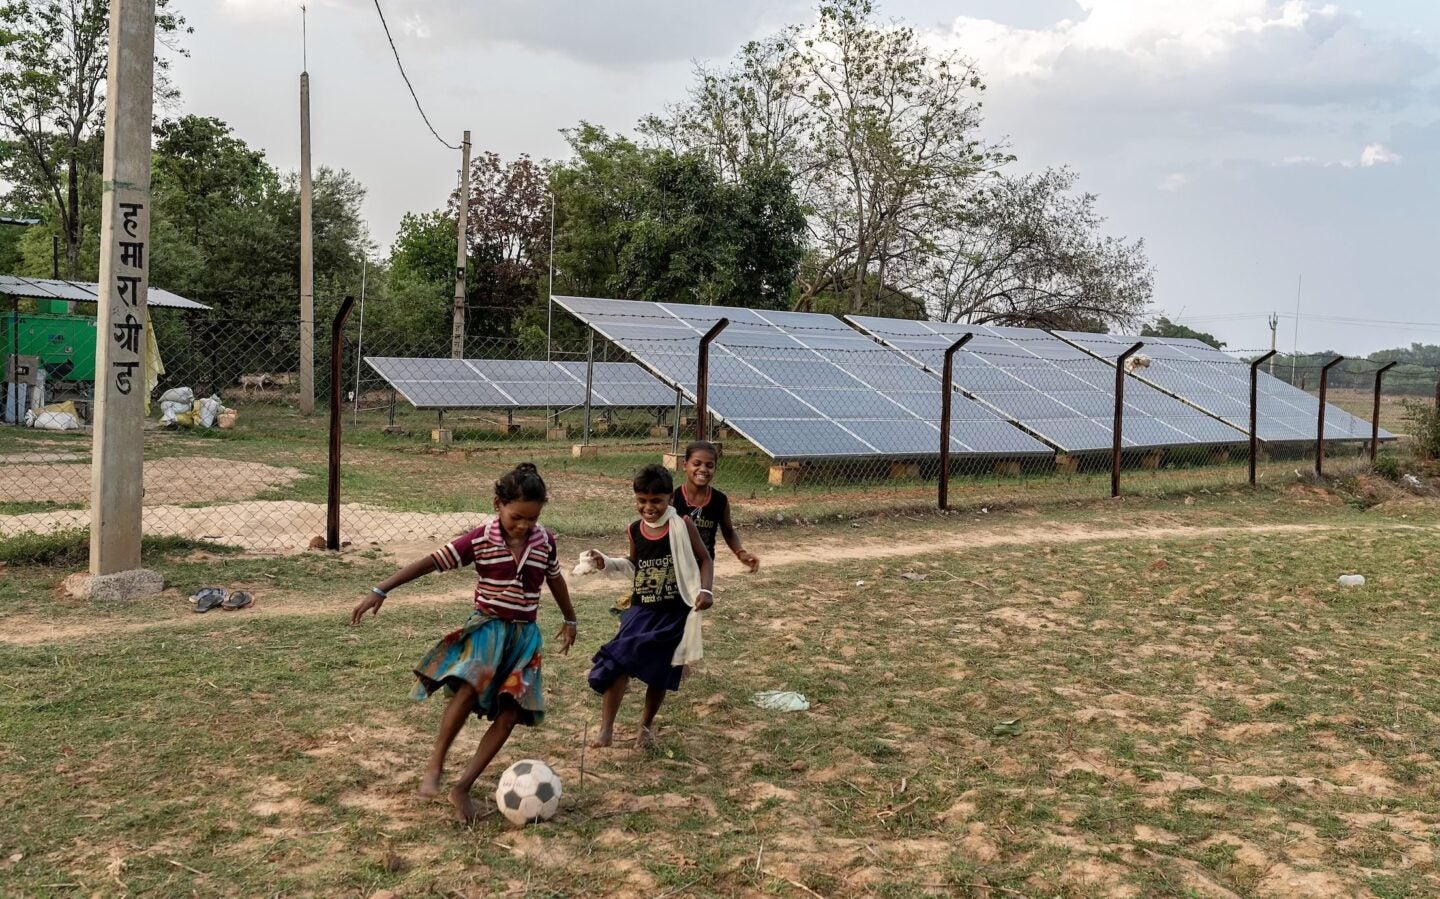 Children playing soccer near solar panels in rural Jharkhand State in eastern India, 2018 (Photo Courtesy of SPI)